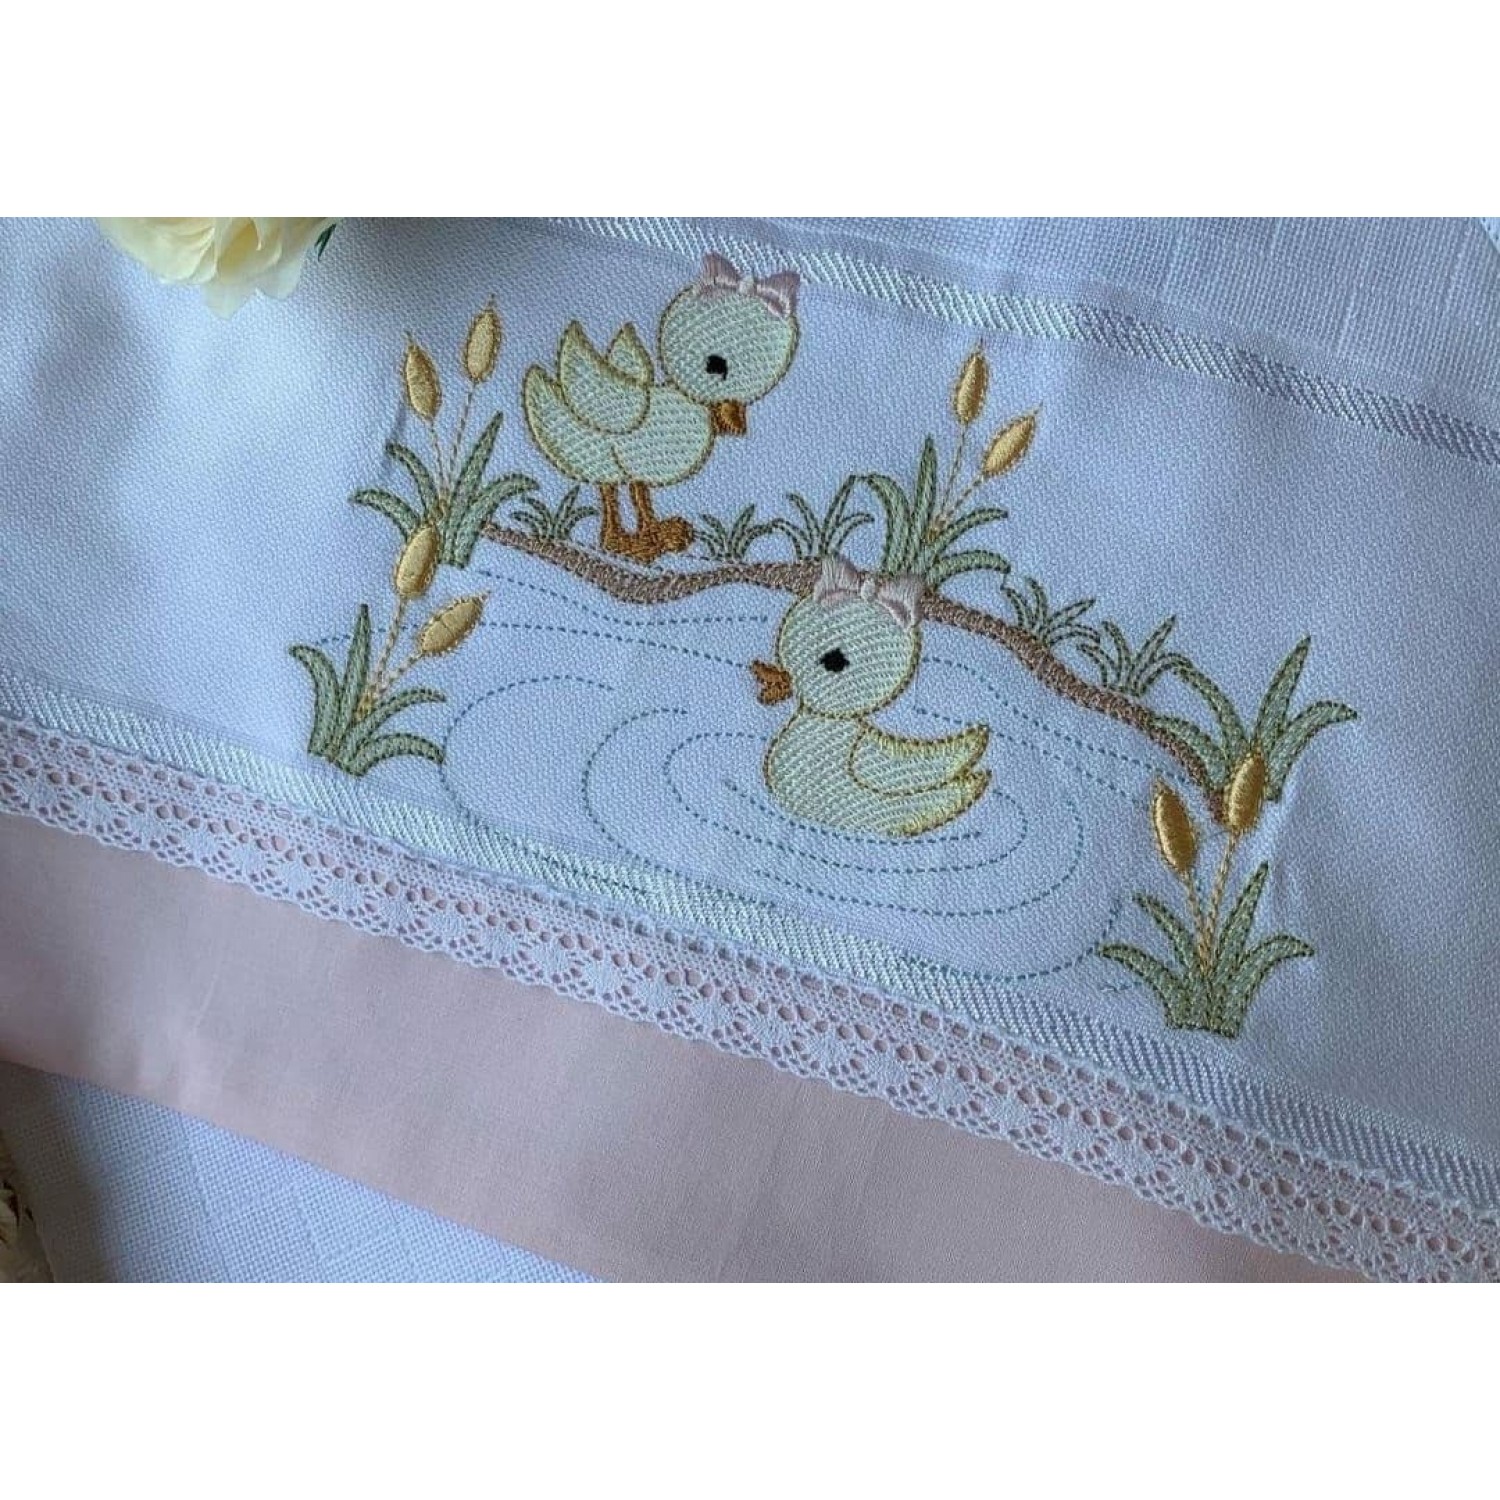 Two Ducks On A Lake Embroidery Design